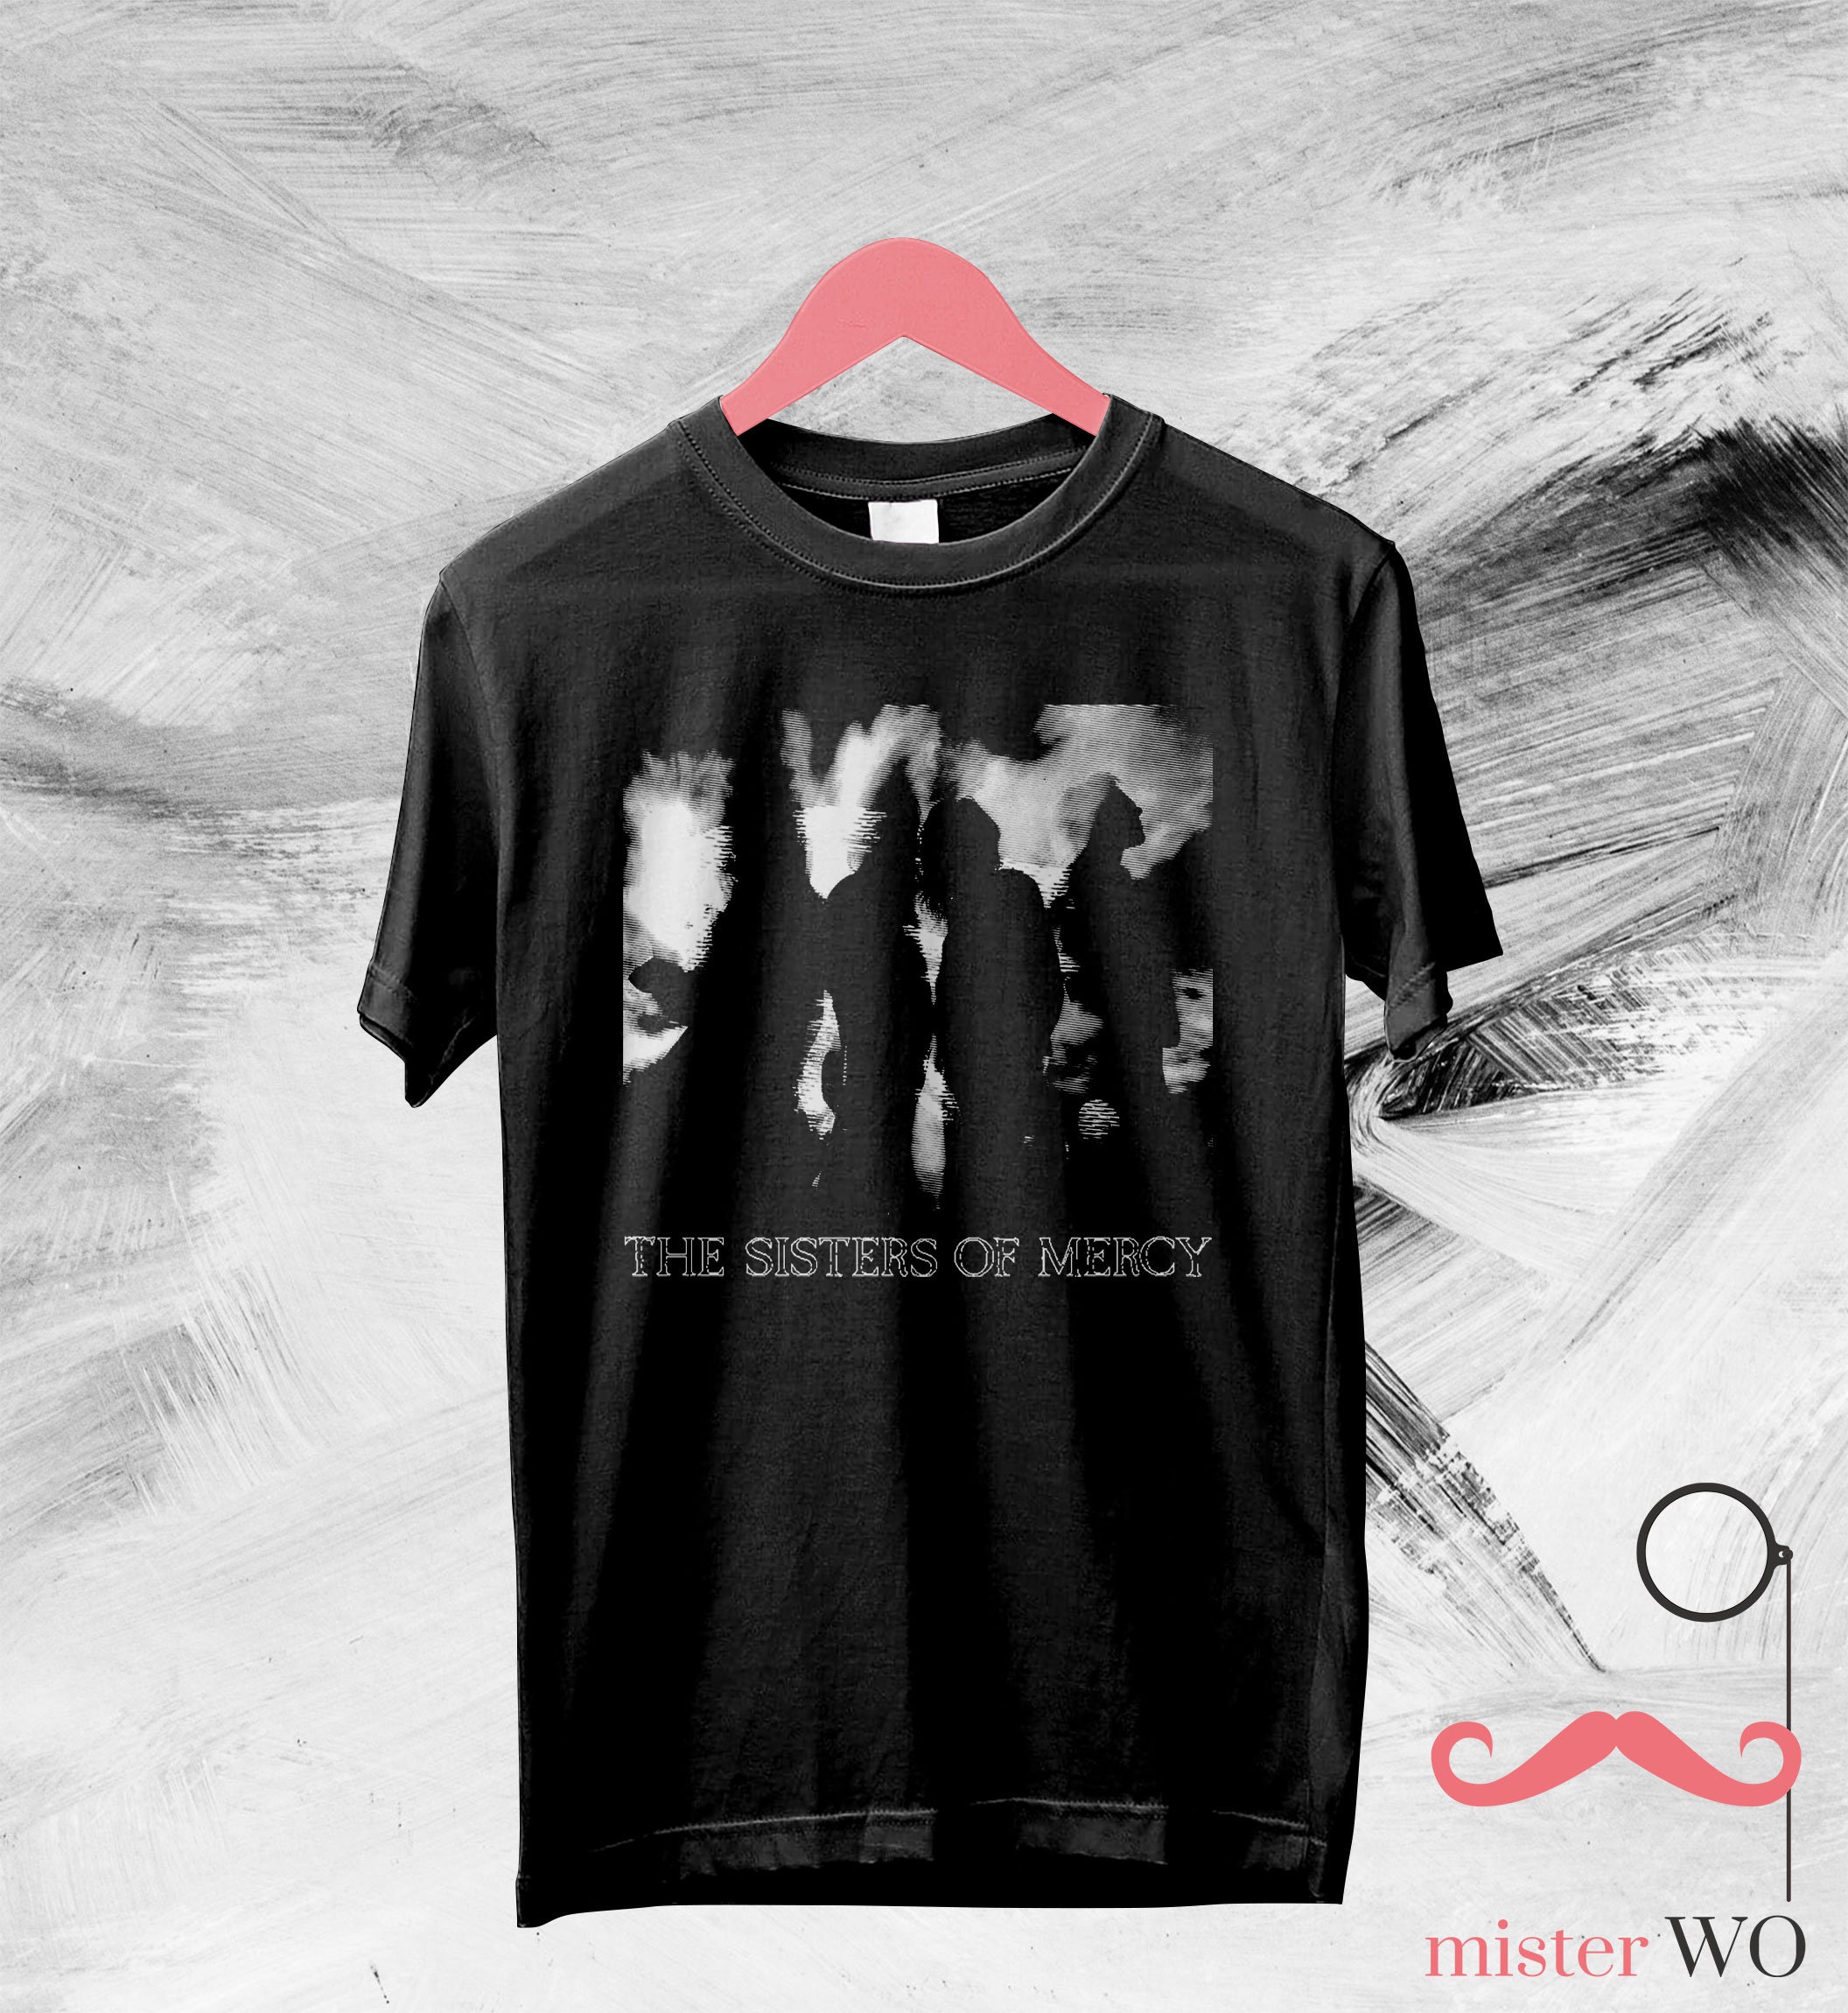 The Sisters of Mercy Tour Vintage T-Shirt - The Sisters of Mercy Shirt